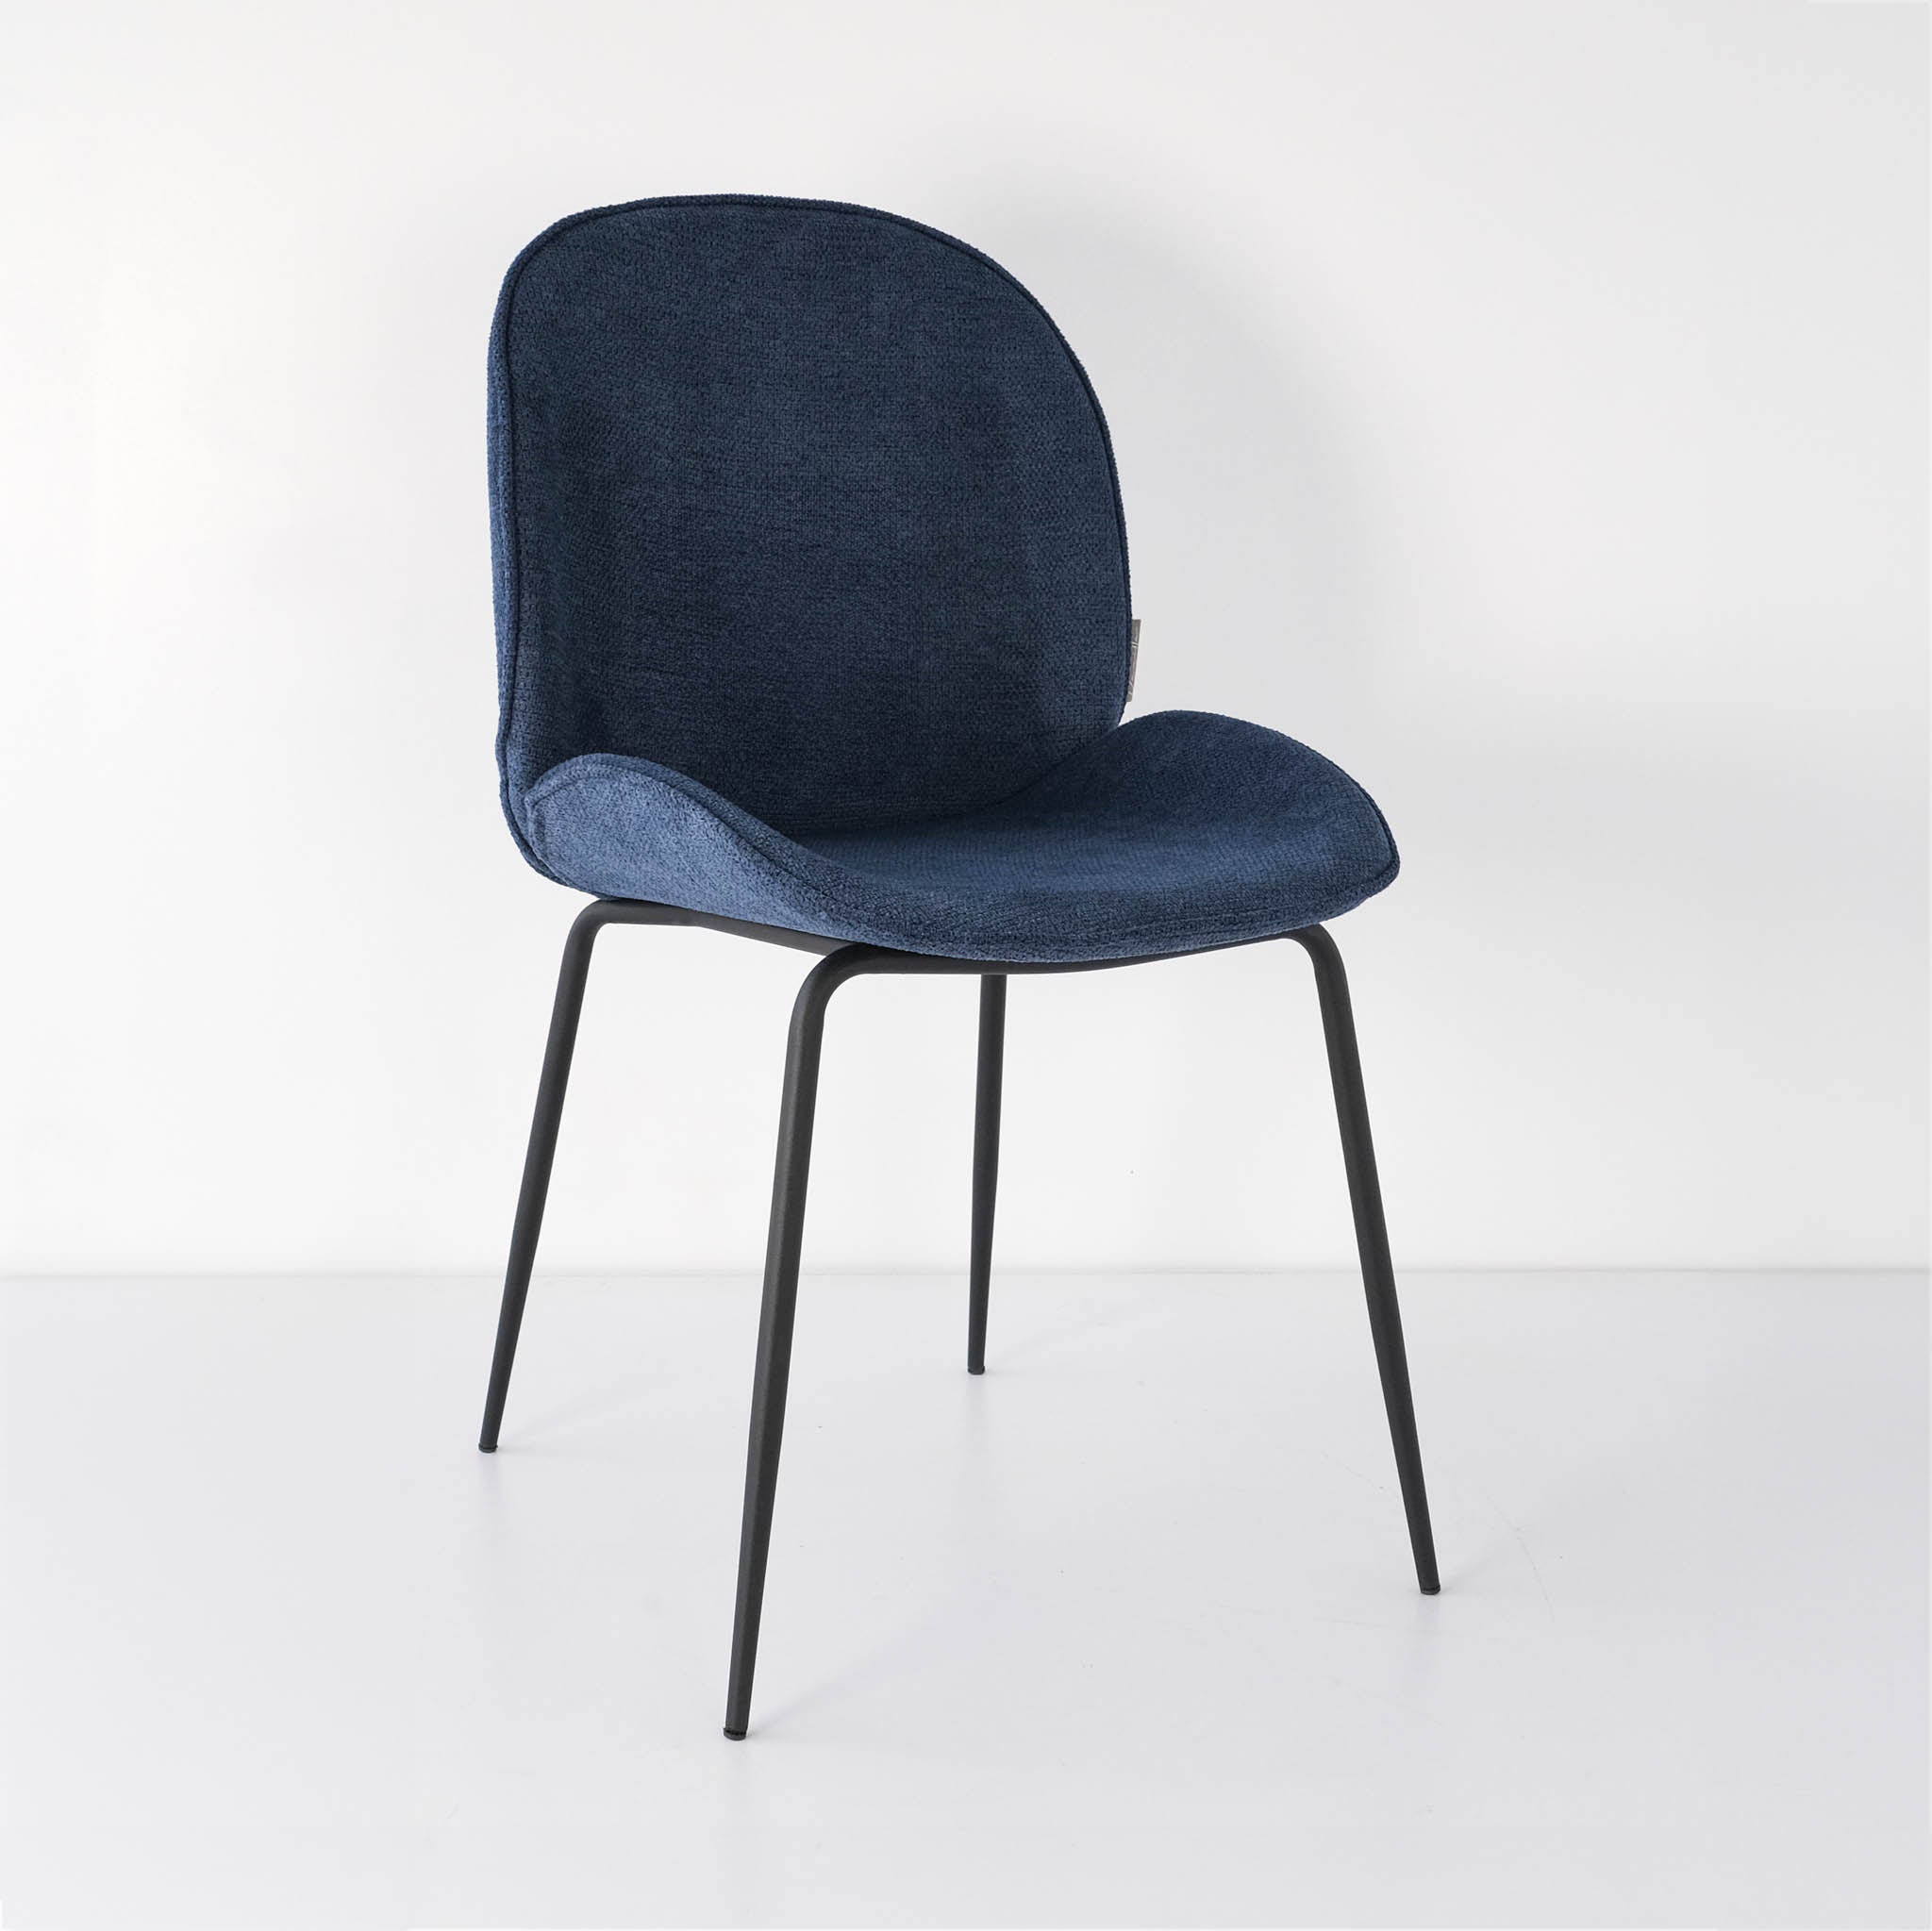 Royal blue Beetle dining chair, vibrant and elegant